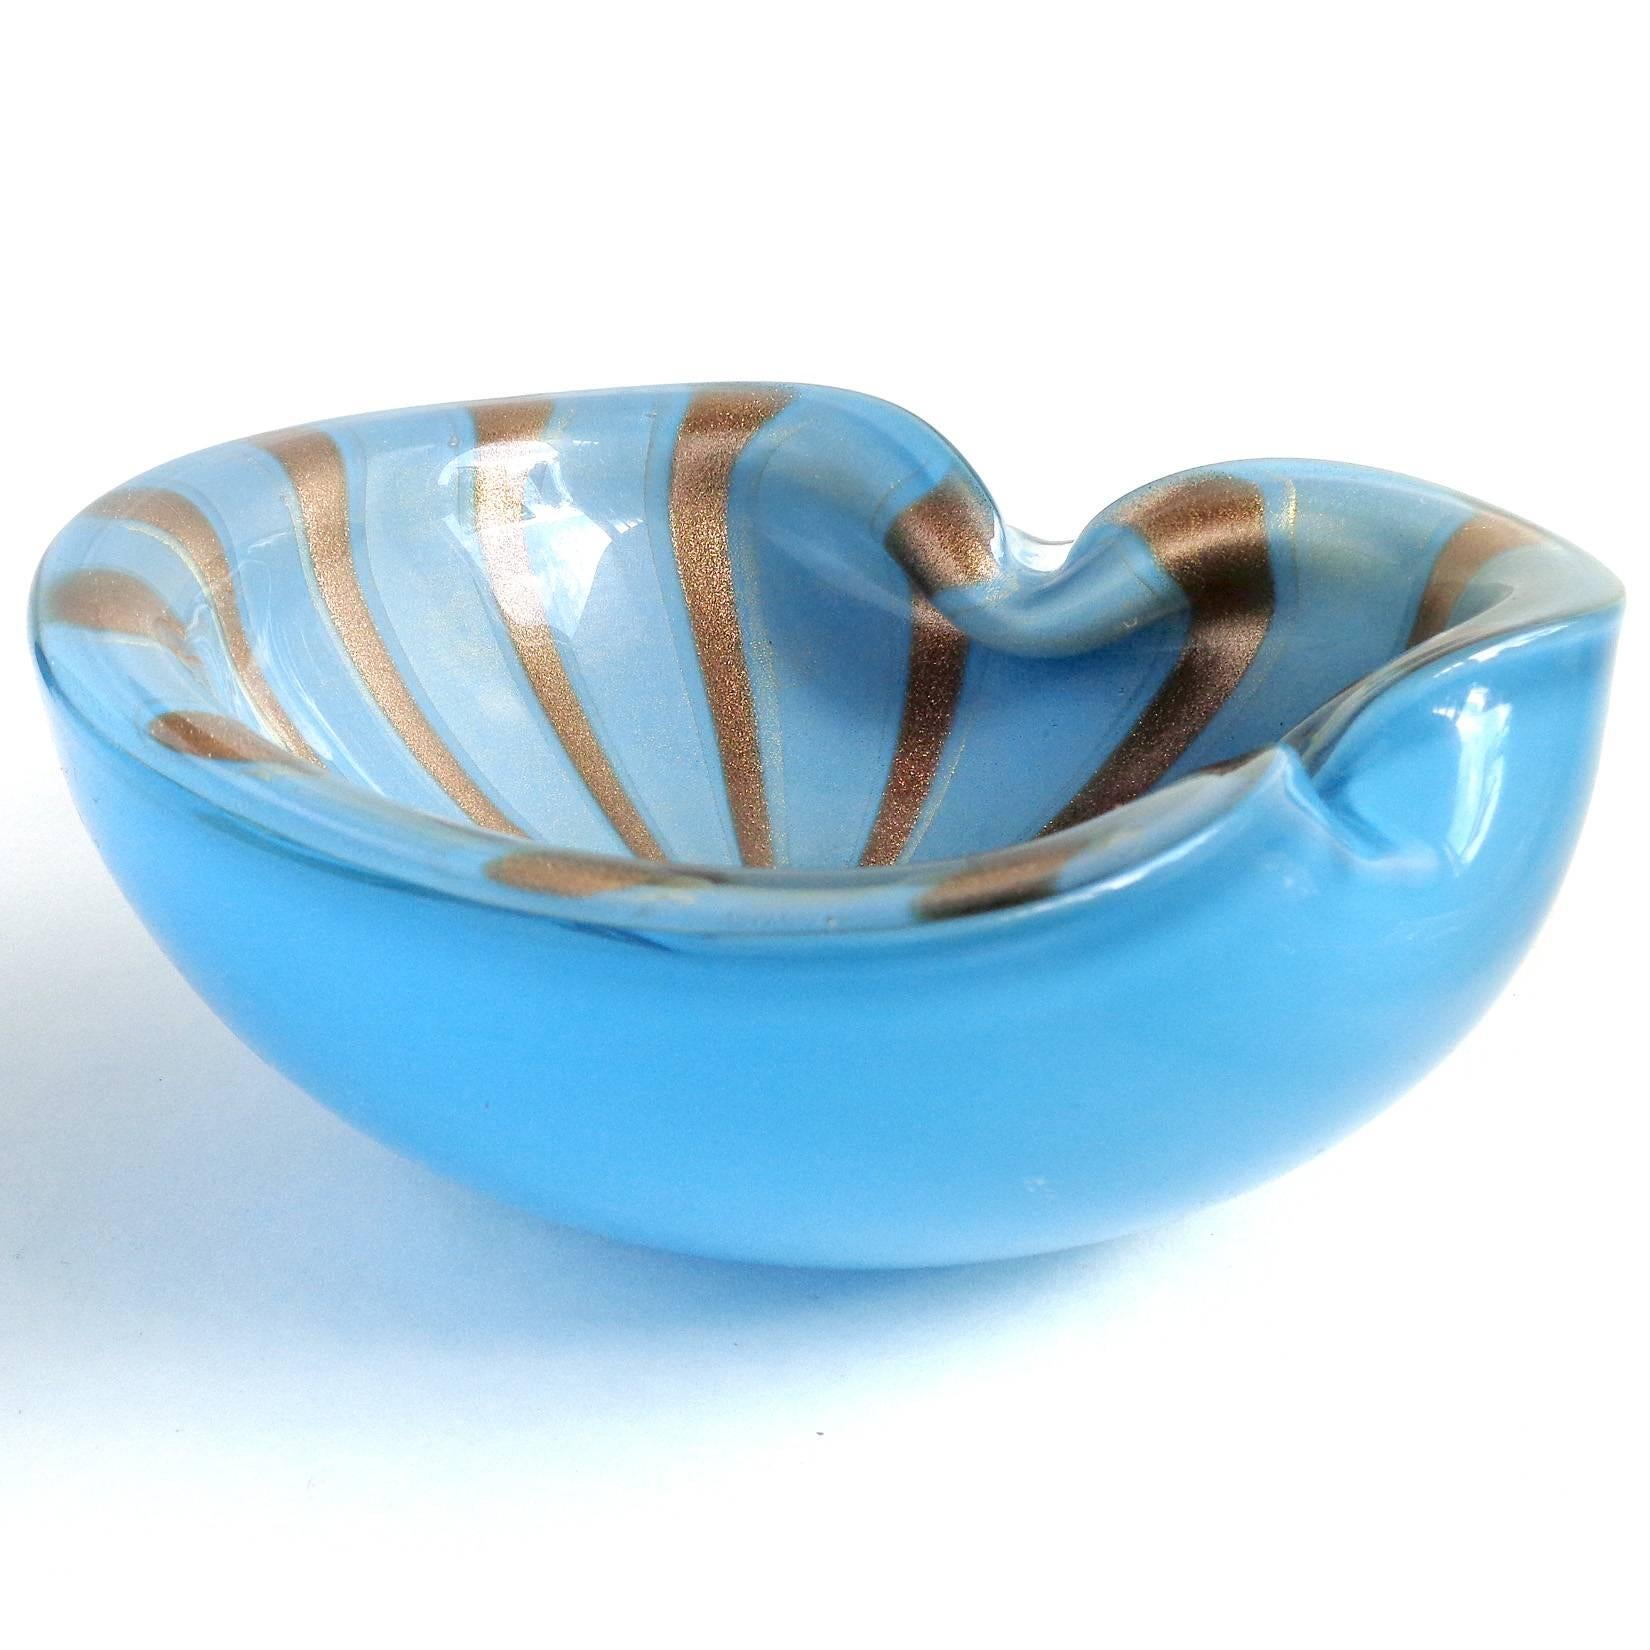 Free shipping worldwide! See details below description.

Gorgeous and large Murano handblown blue, gold and aventurine flecks art glass bowl. Documented to designer Alfredo Barbini, circa 1950-1960s. The piece measures 8 1/4